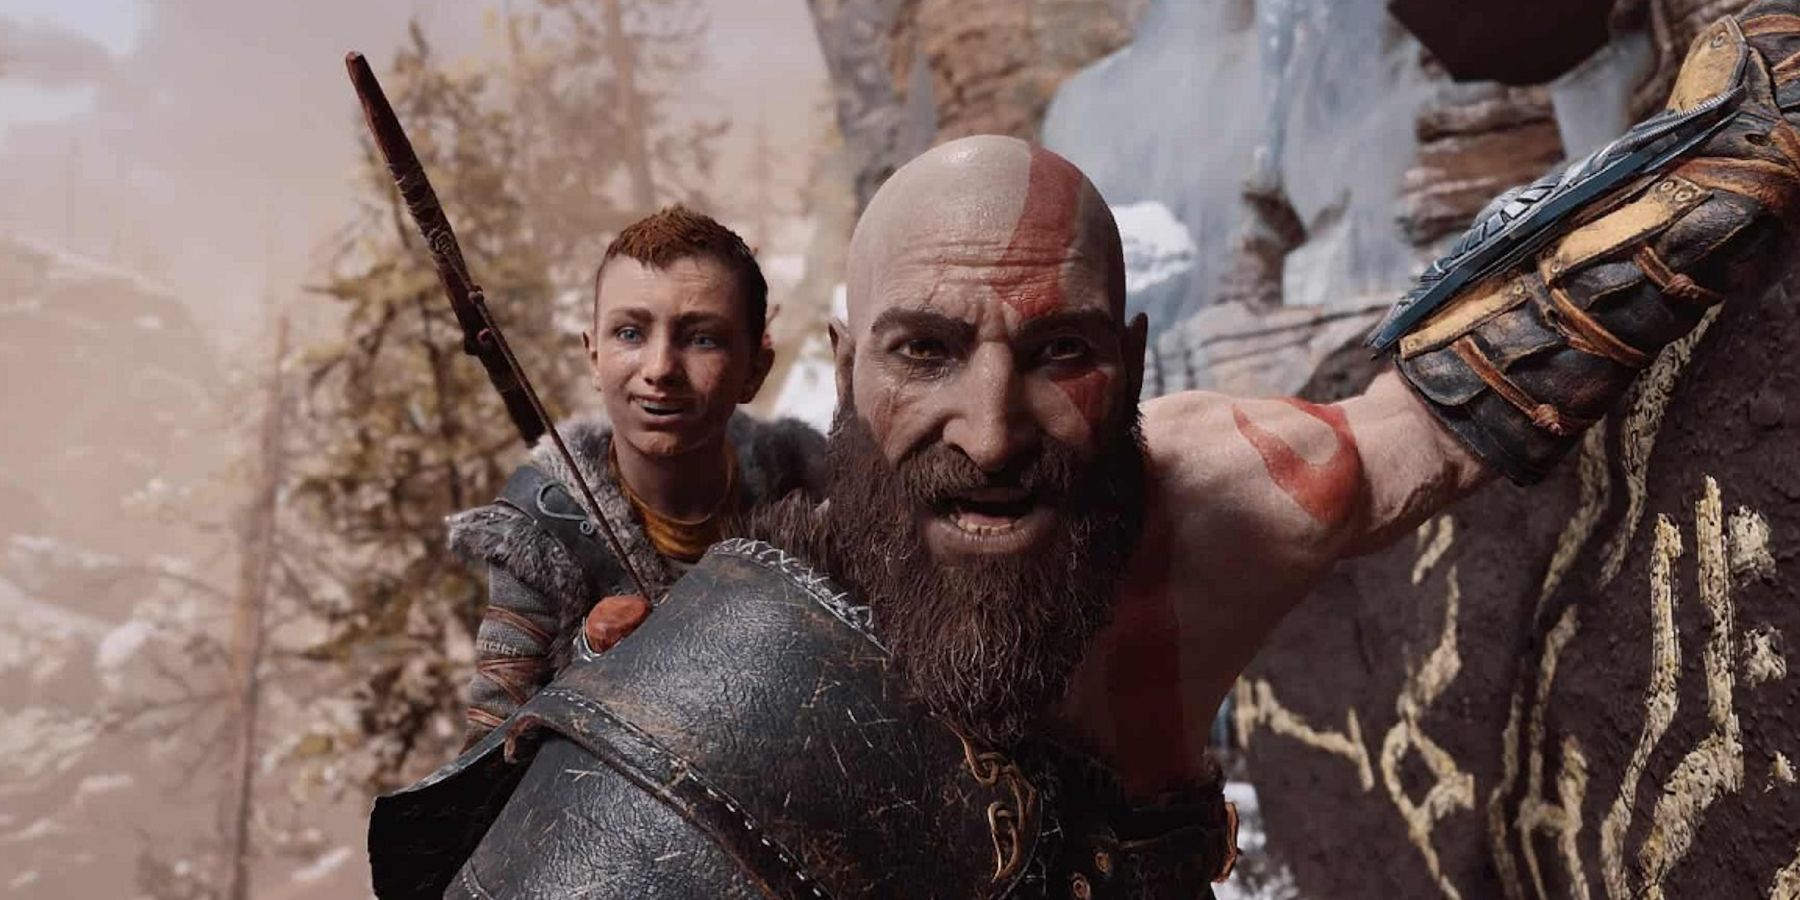 Chris Judge, the voice of Kratos, and the cast of God of War will